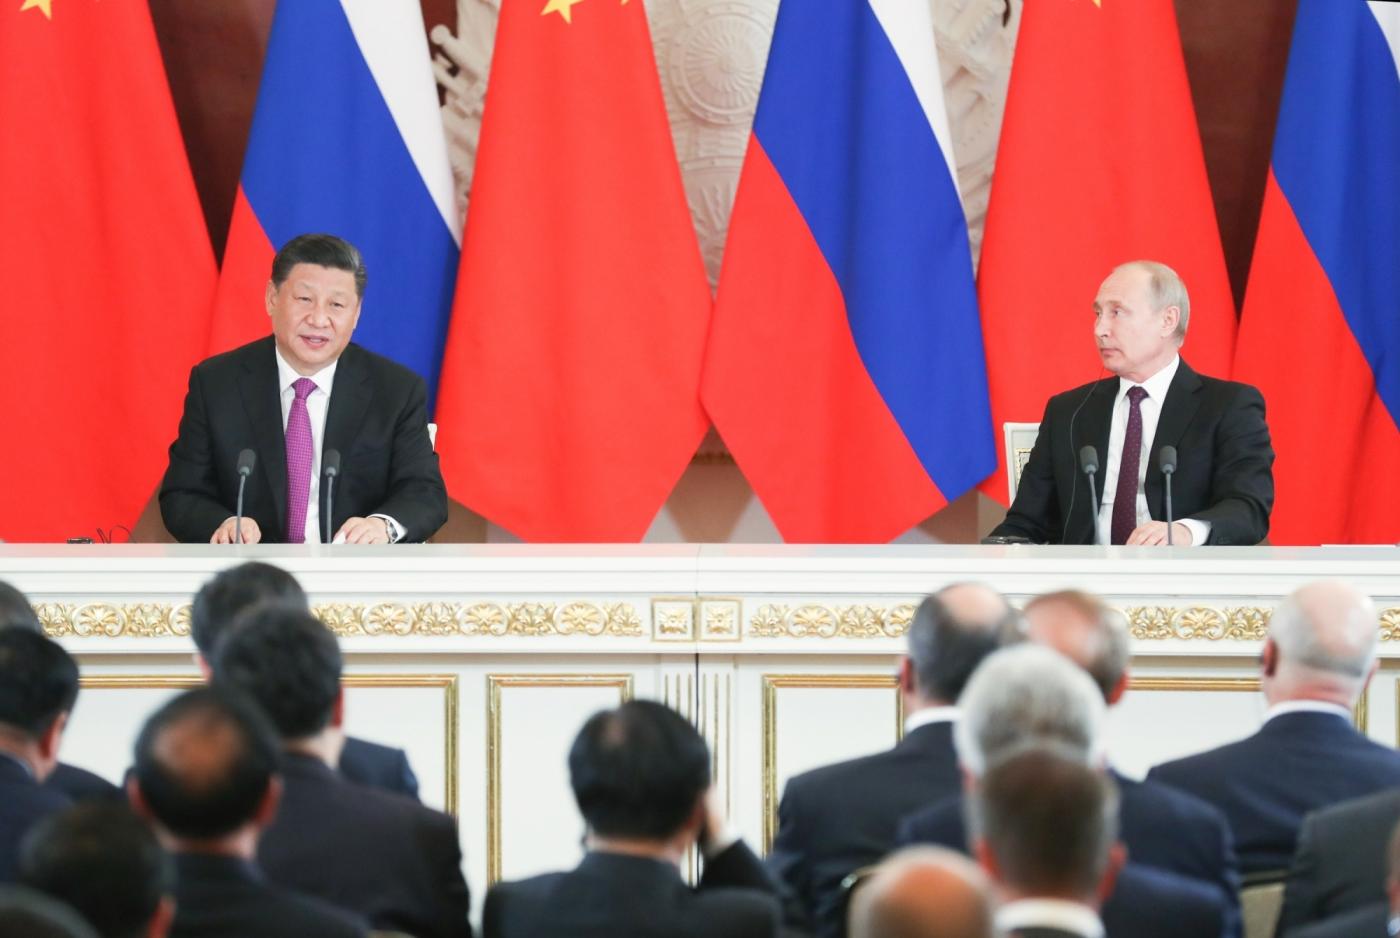 MOSCOW, June 5, 2019 (Xinhua) -- Chinese President Xi Jinping (L) and his Russian counterpart Vladimir Putin meet the press after their talks in Moscow, Russia, June 5, 2019. Xi Jinping held talks with Vladimir Putin at the Kremlin in Moscow on Wednesday. (Xinhua/Yao Dawei/IANS) by .